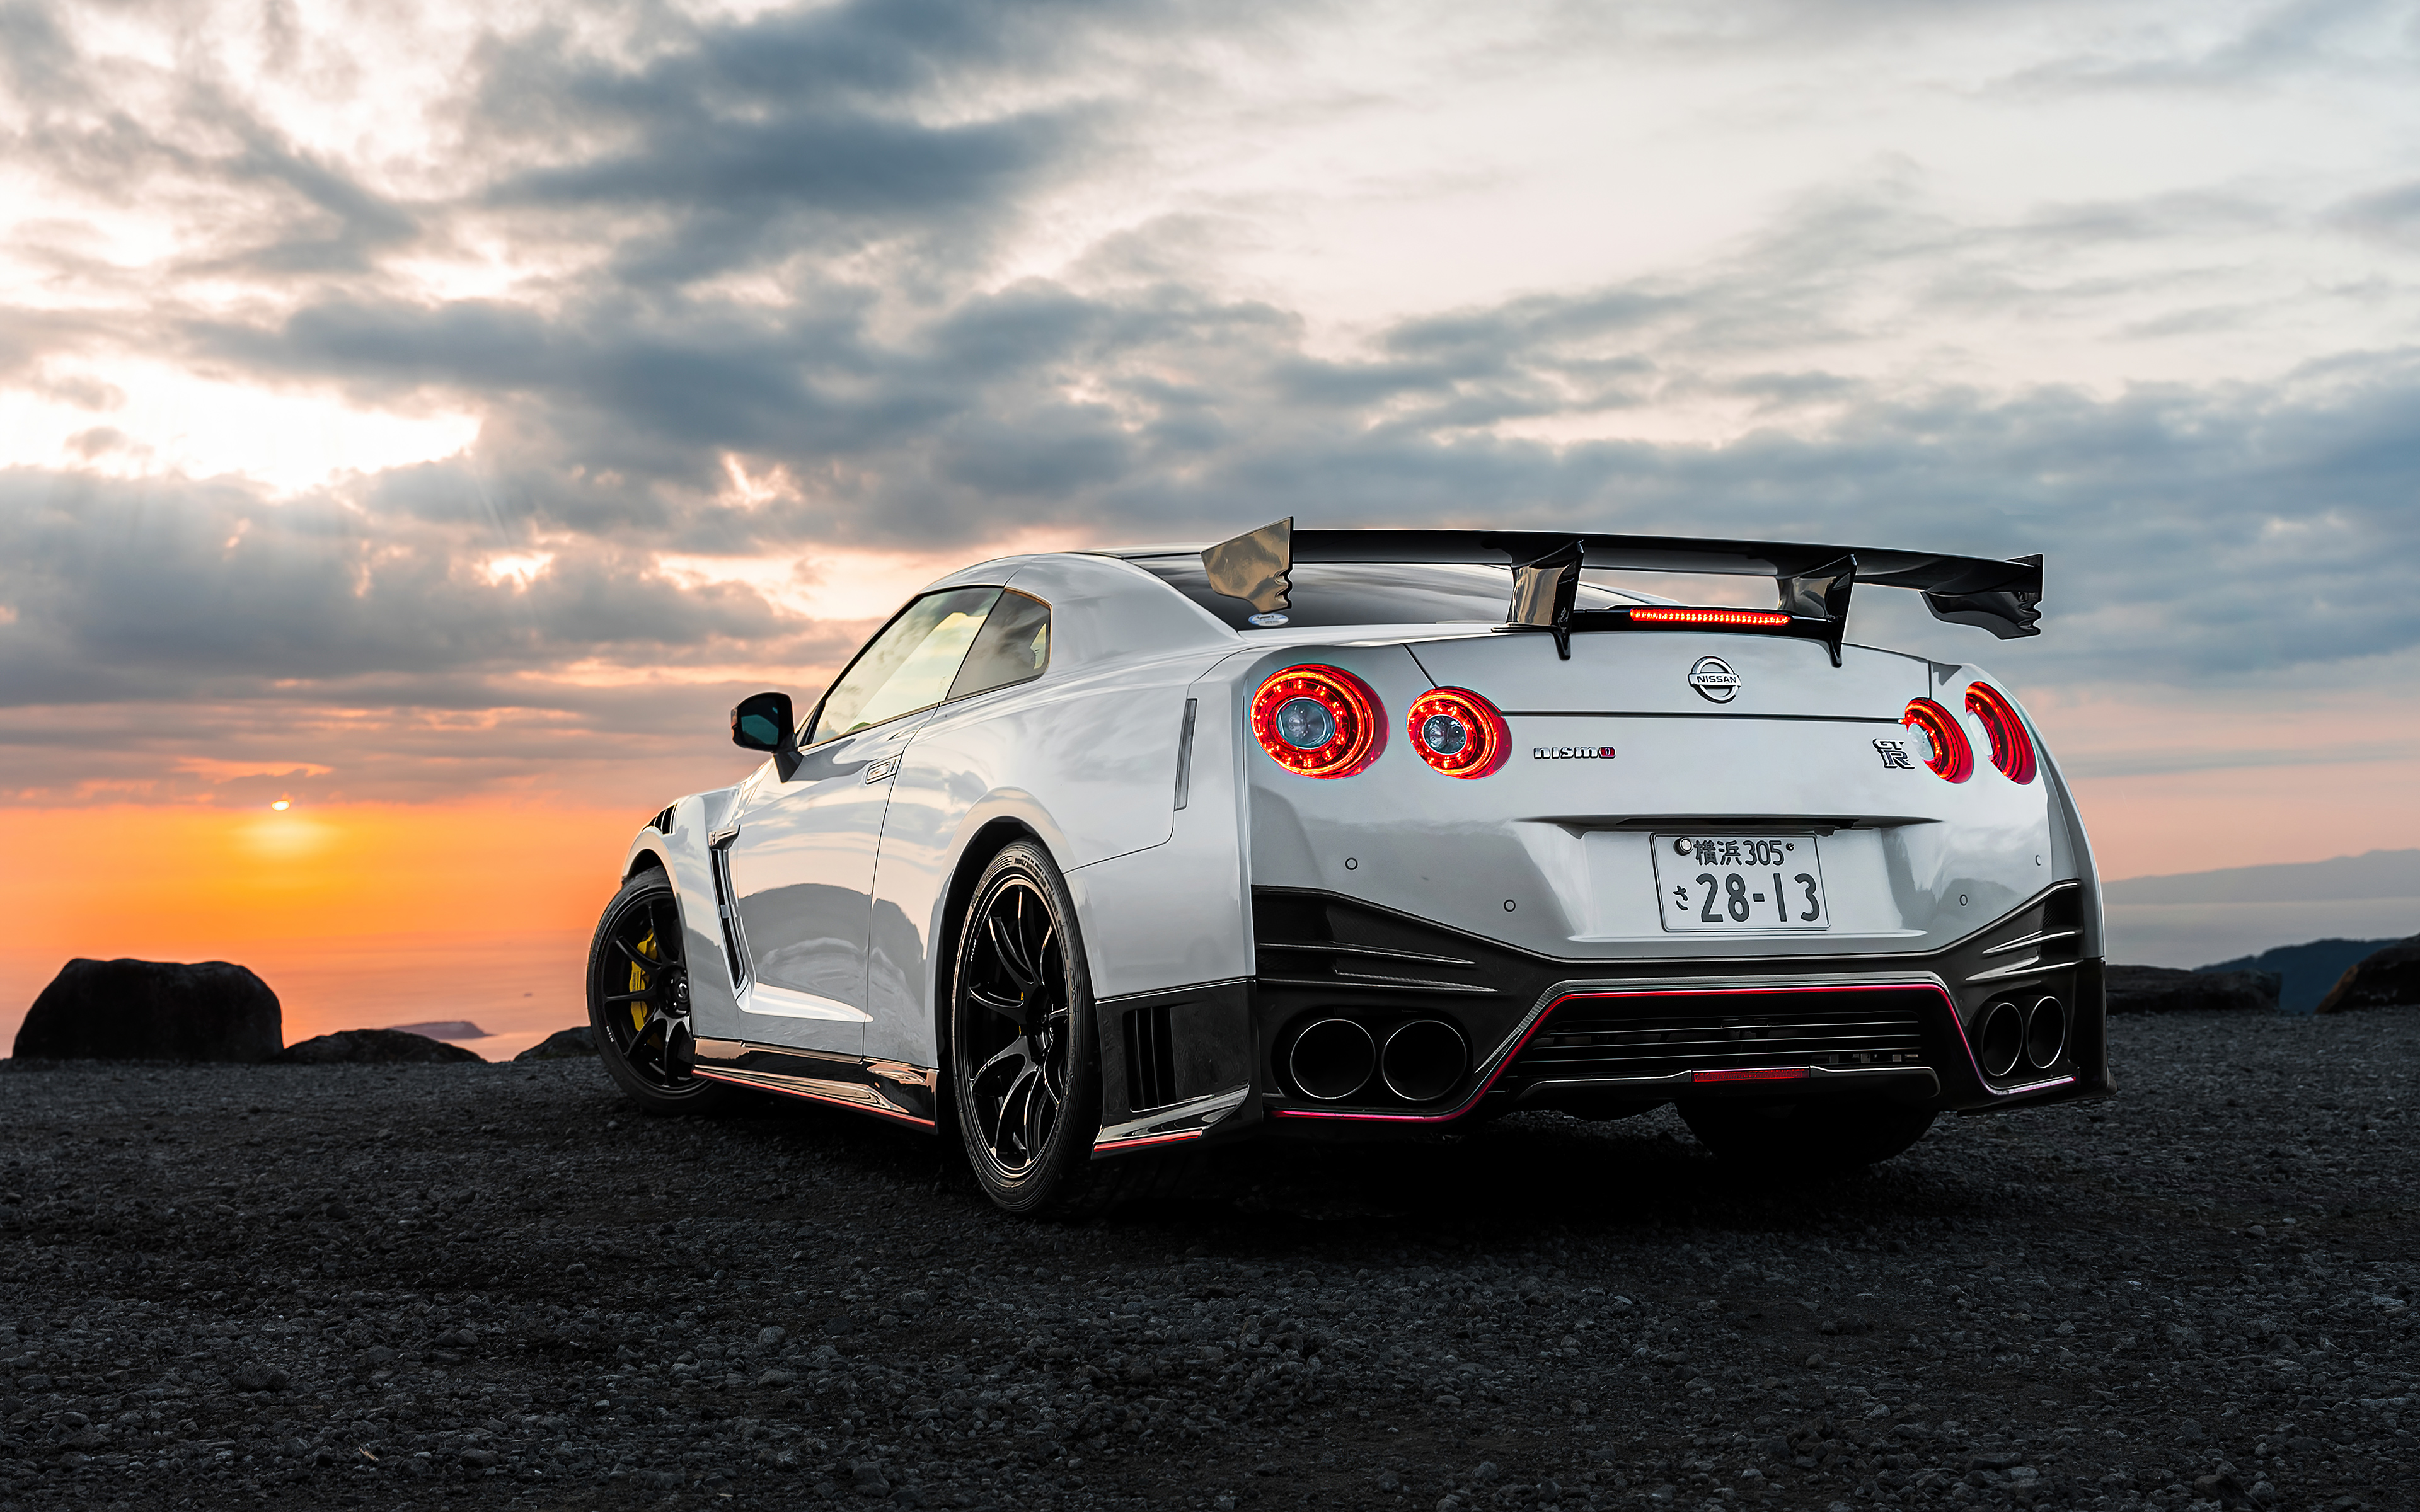 640x1136 Nissan Gt R Nismo Rear Iphone 5 5c 5s Se Ipod Touch Hd 4k Wallpapers Images Backgrounds Photos And Pictures